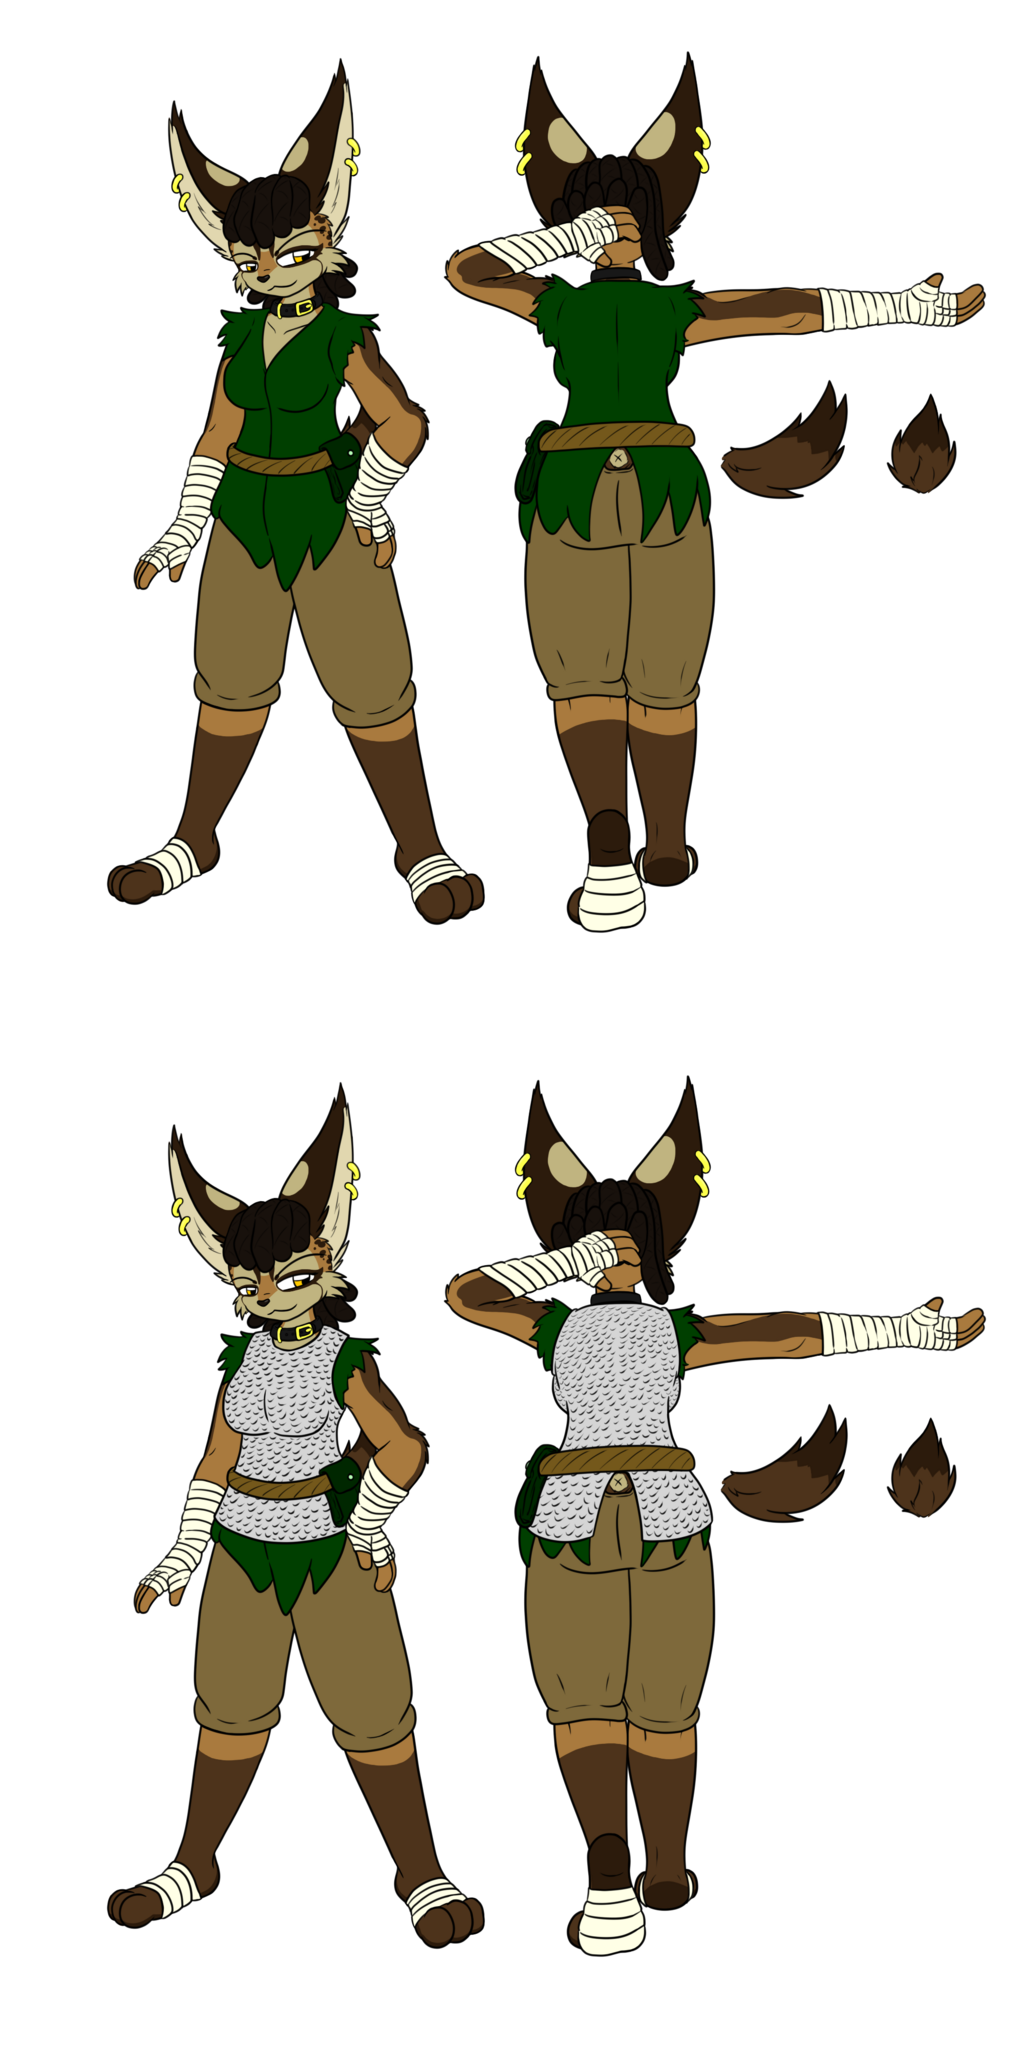 Revya Cunning - Ranger Outfit